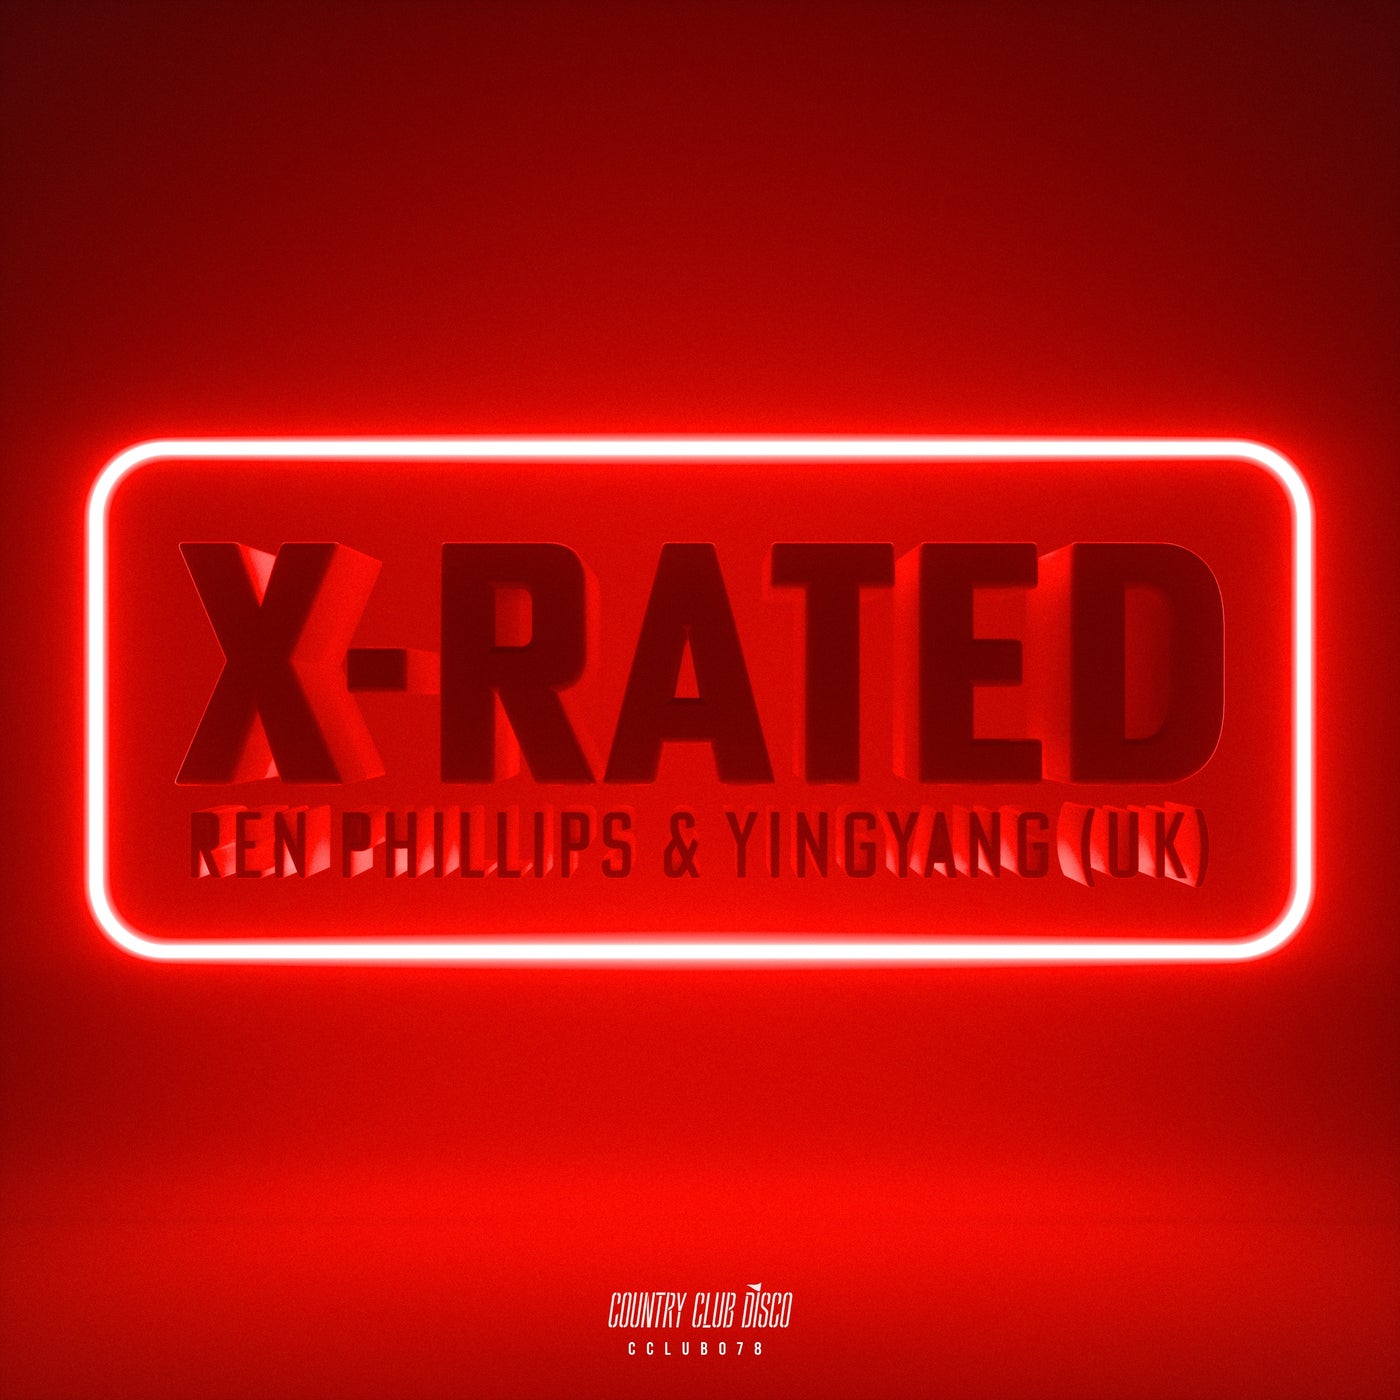 X-Rated